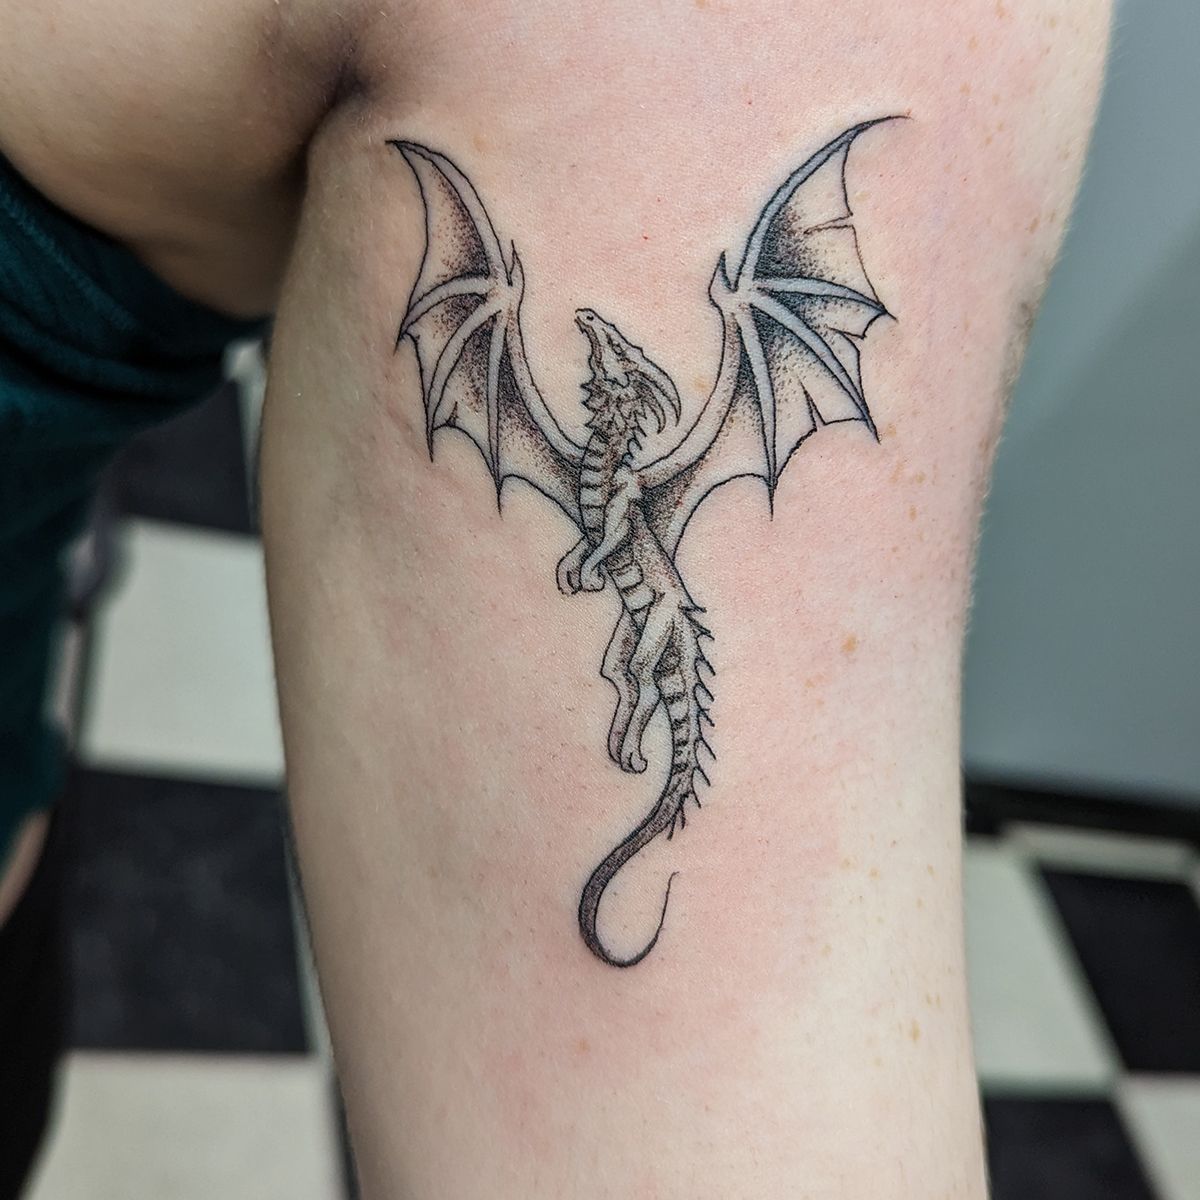 How to Draw a Dragon Tattoo - Really Easy Drawing Tutorial